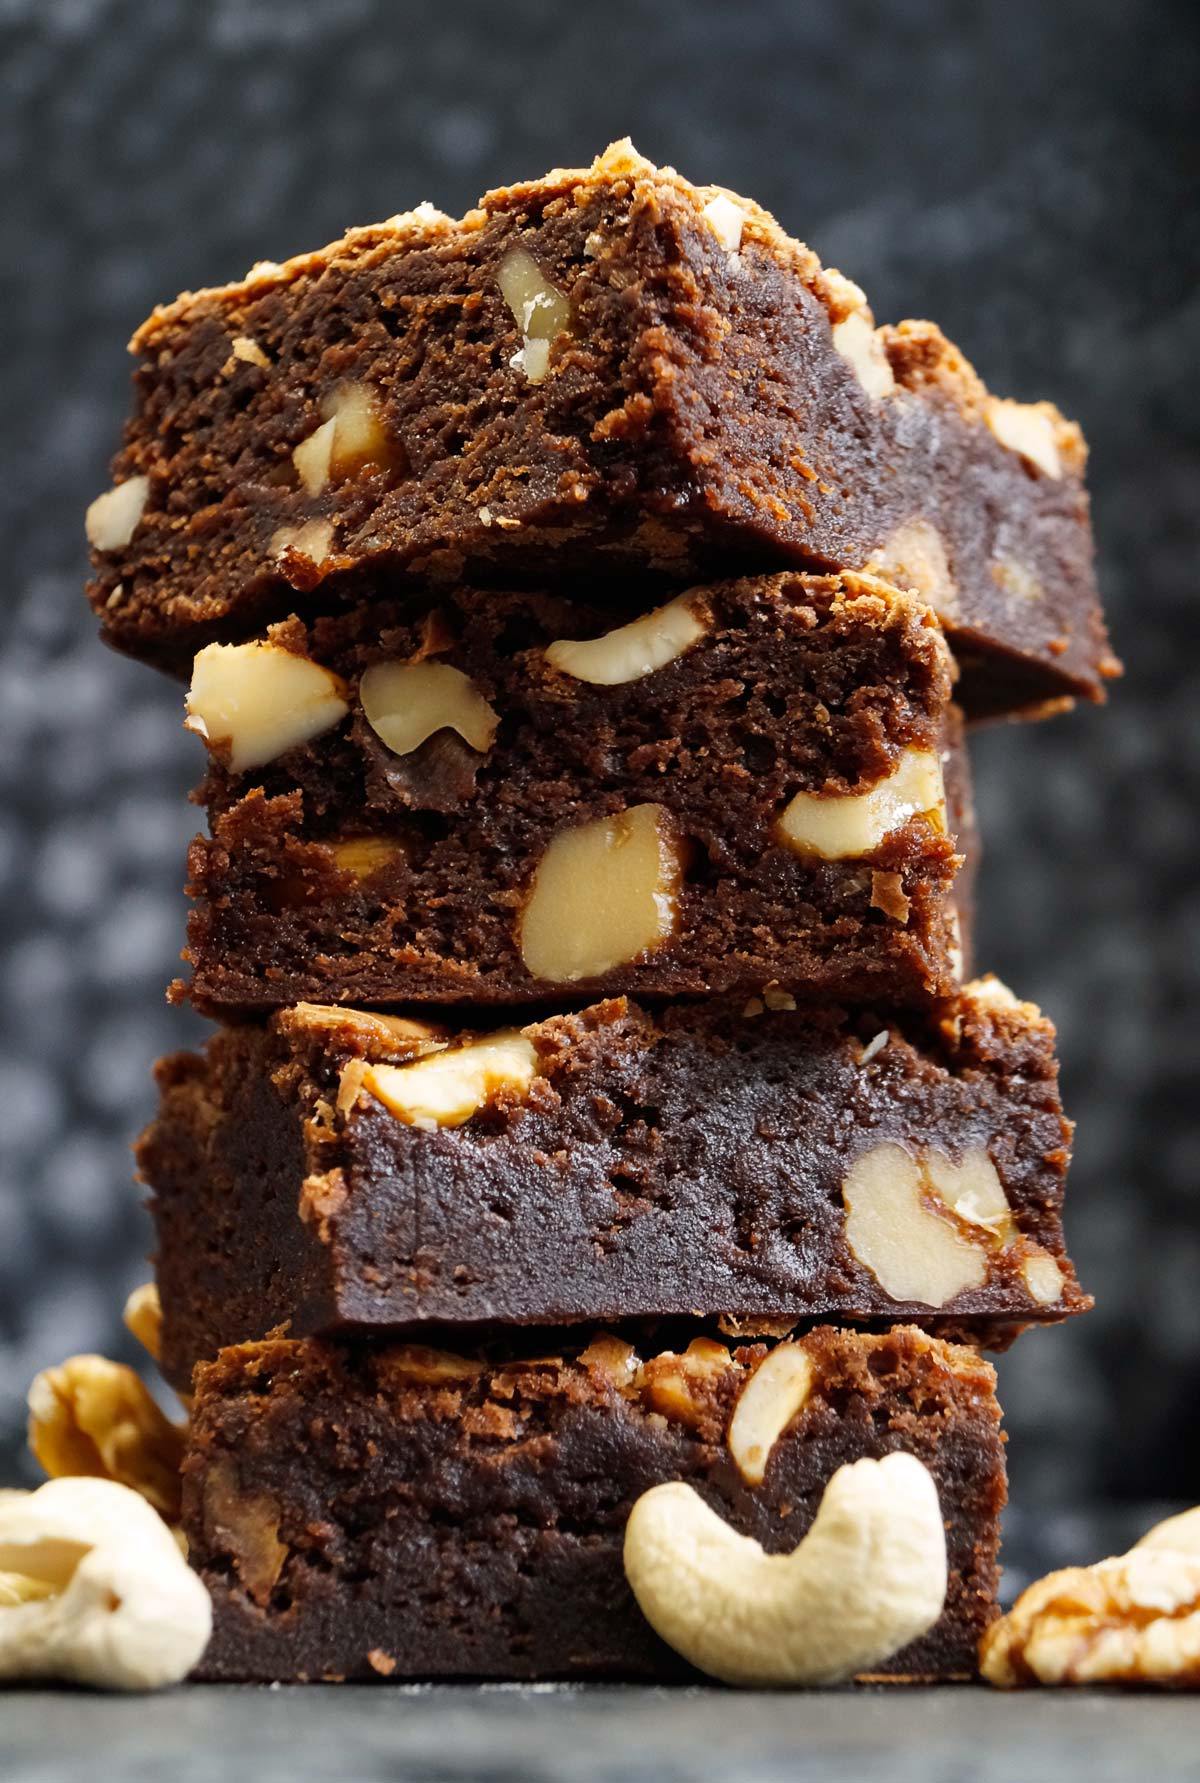 brownies-karamell-nuesse-caramel-nuts :: Caro in the kitchen